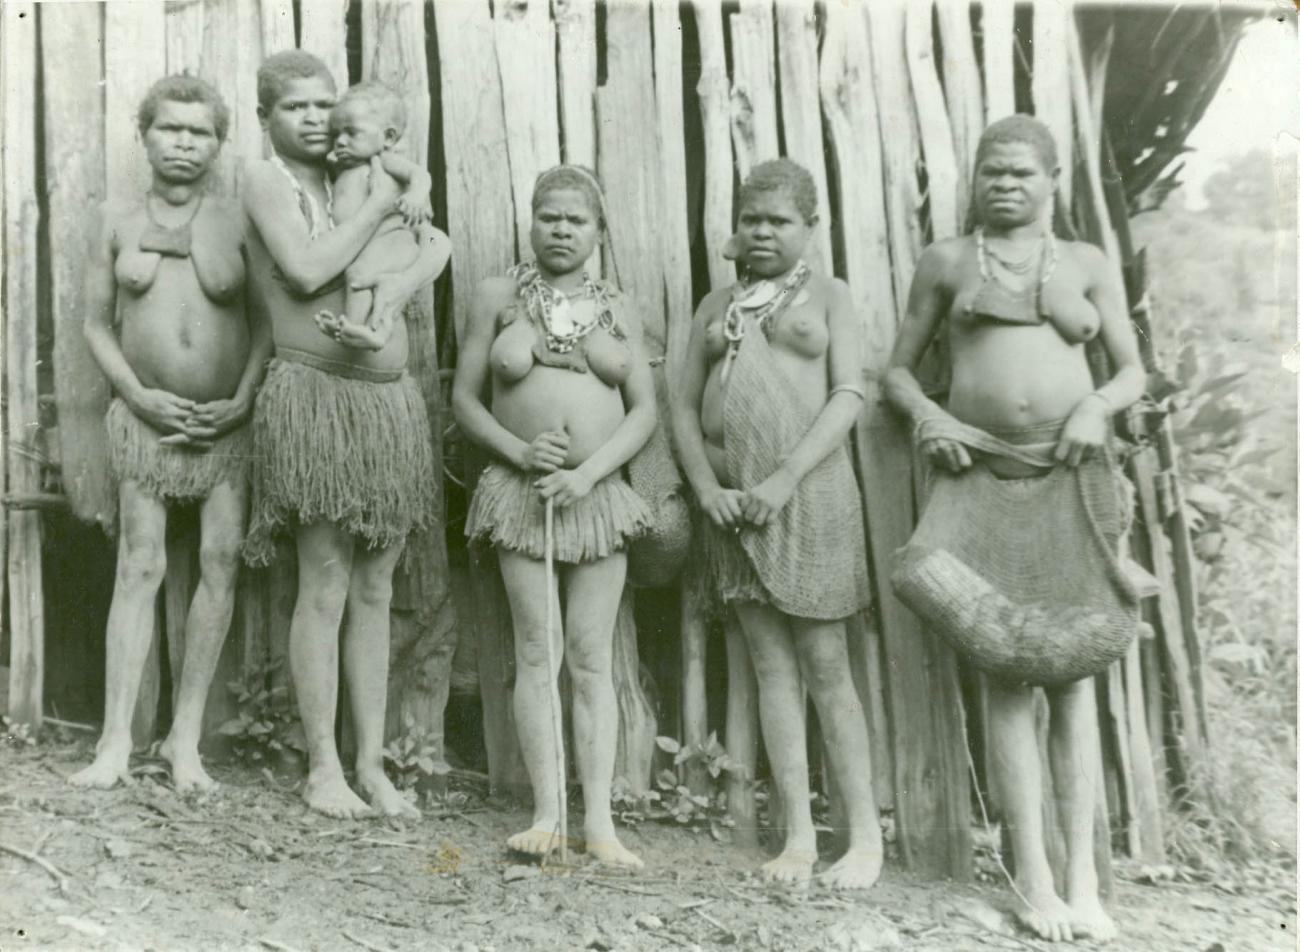 BD/40/50 - 
Group of five Papua women, probably from the Wissel Lake area
